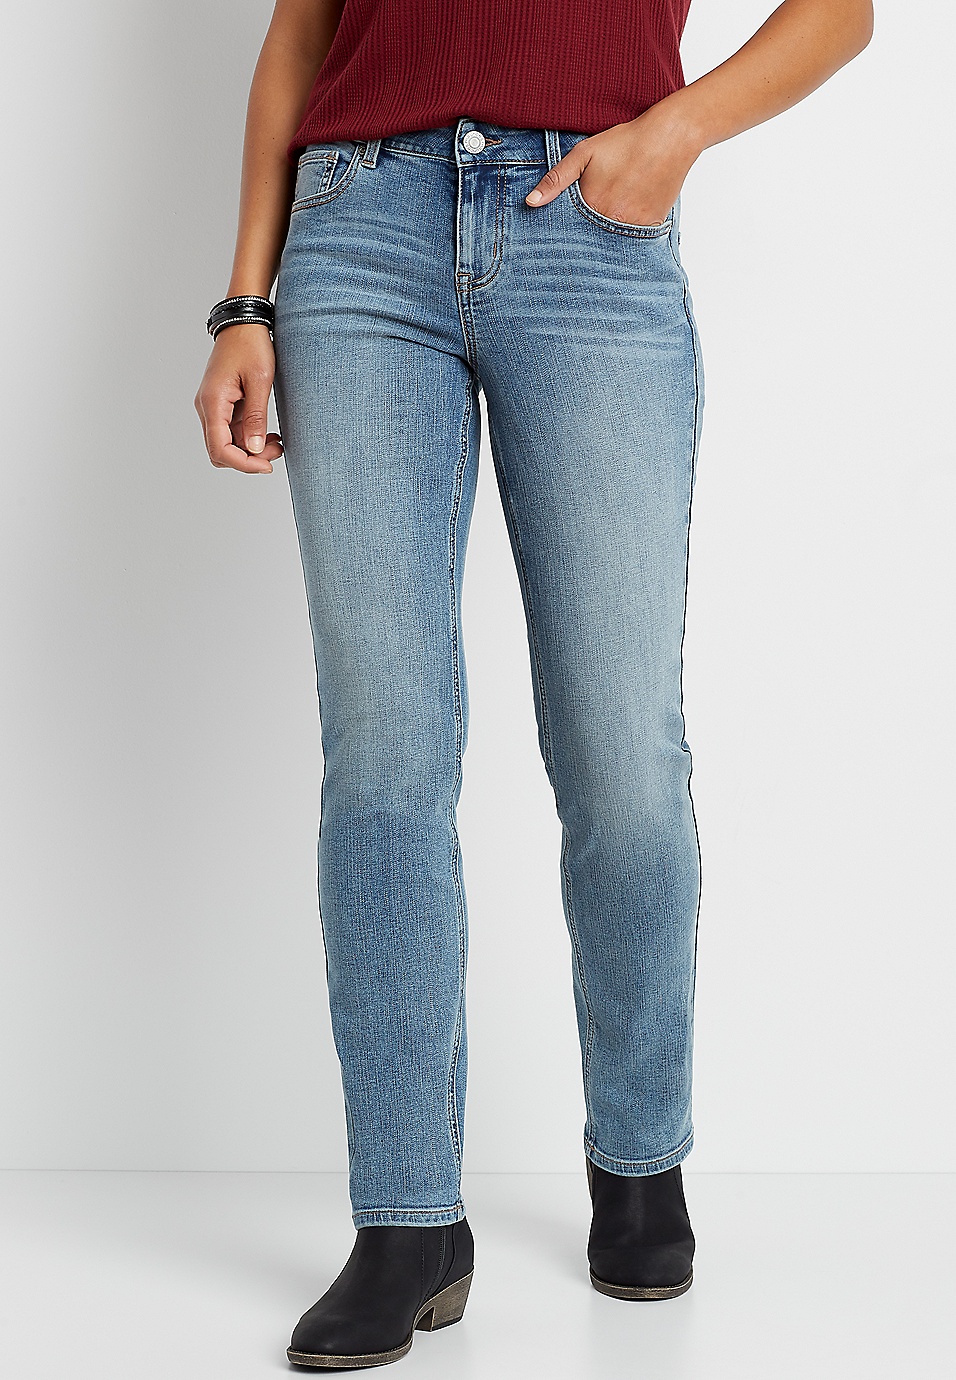 Pretentieloos Speciaal Chemicus m jeans by maurices™ Classic Straight Mid Rise Jean | maurices